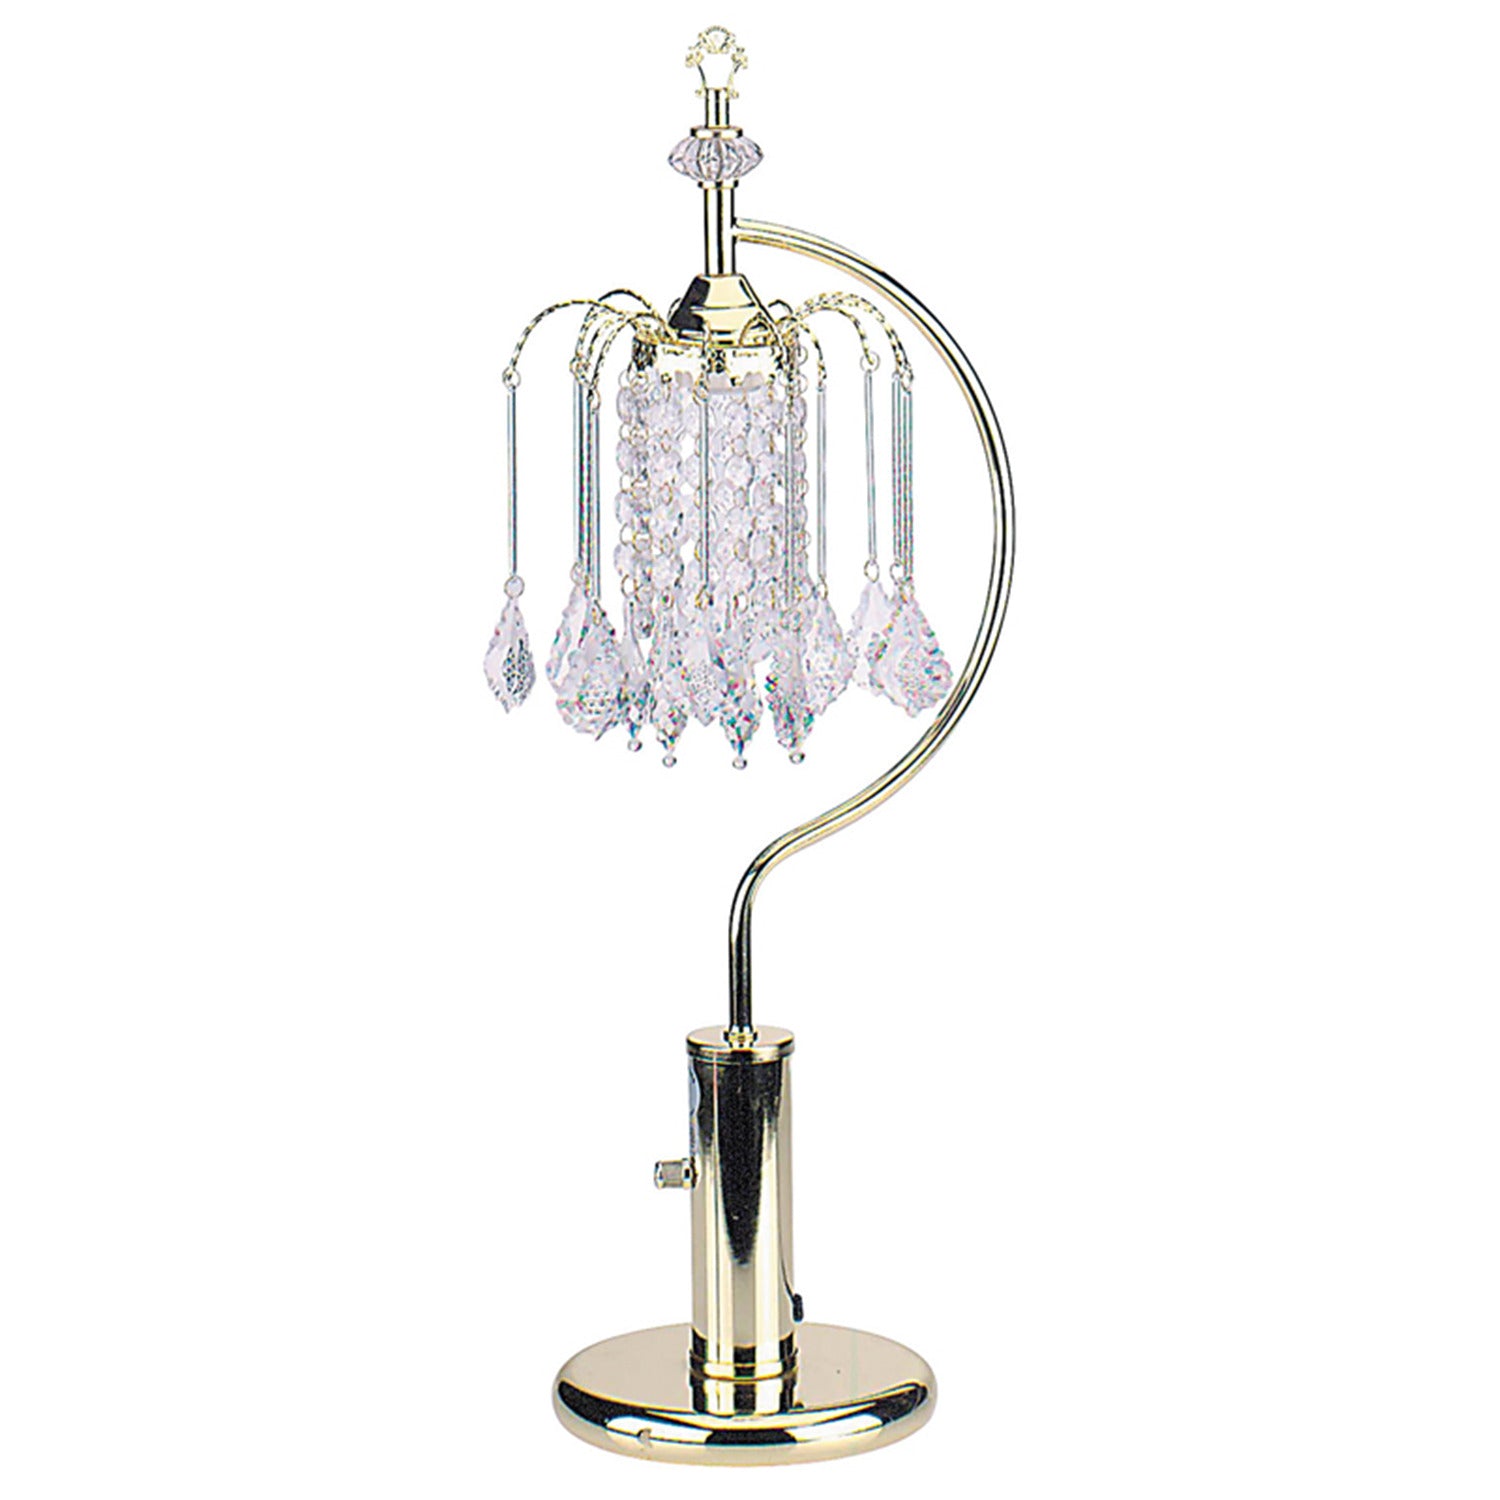 27" H Table Lamp With Crystal-Inspired chandelier style Shade In Gold